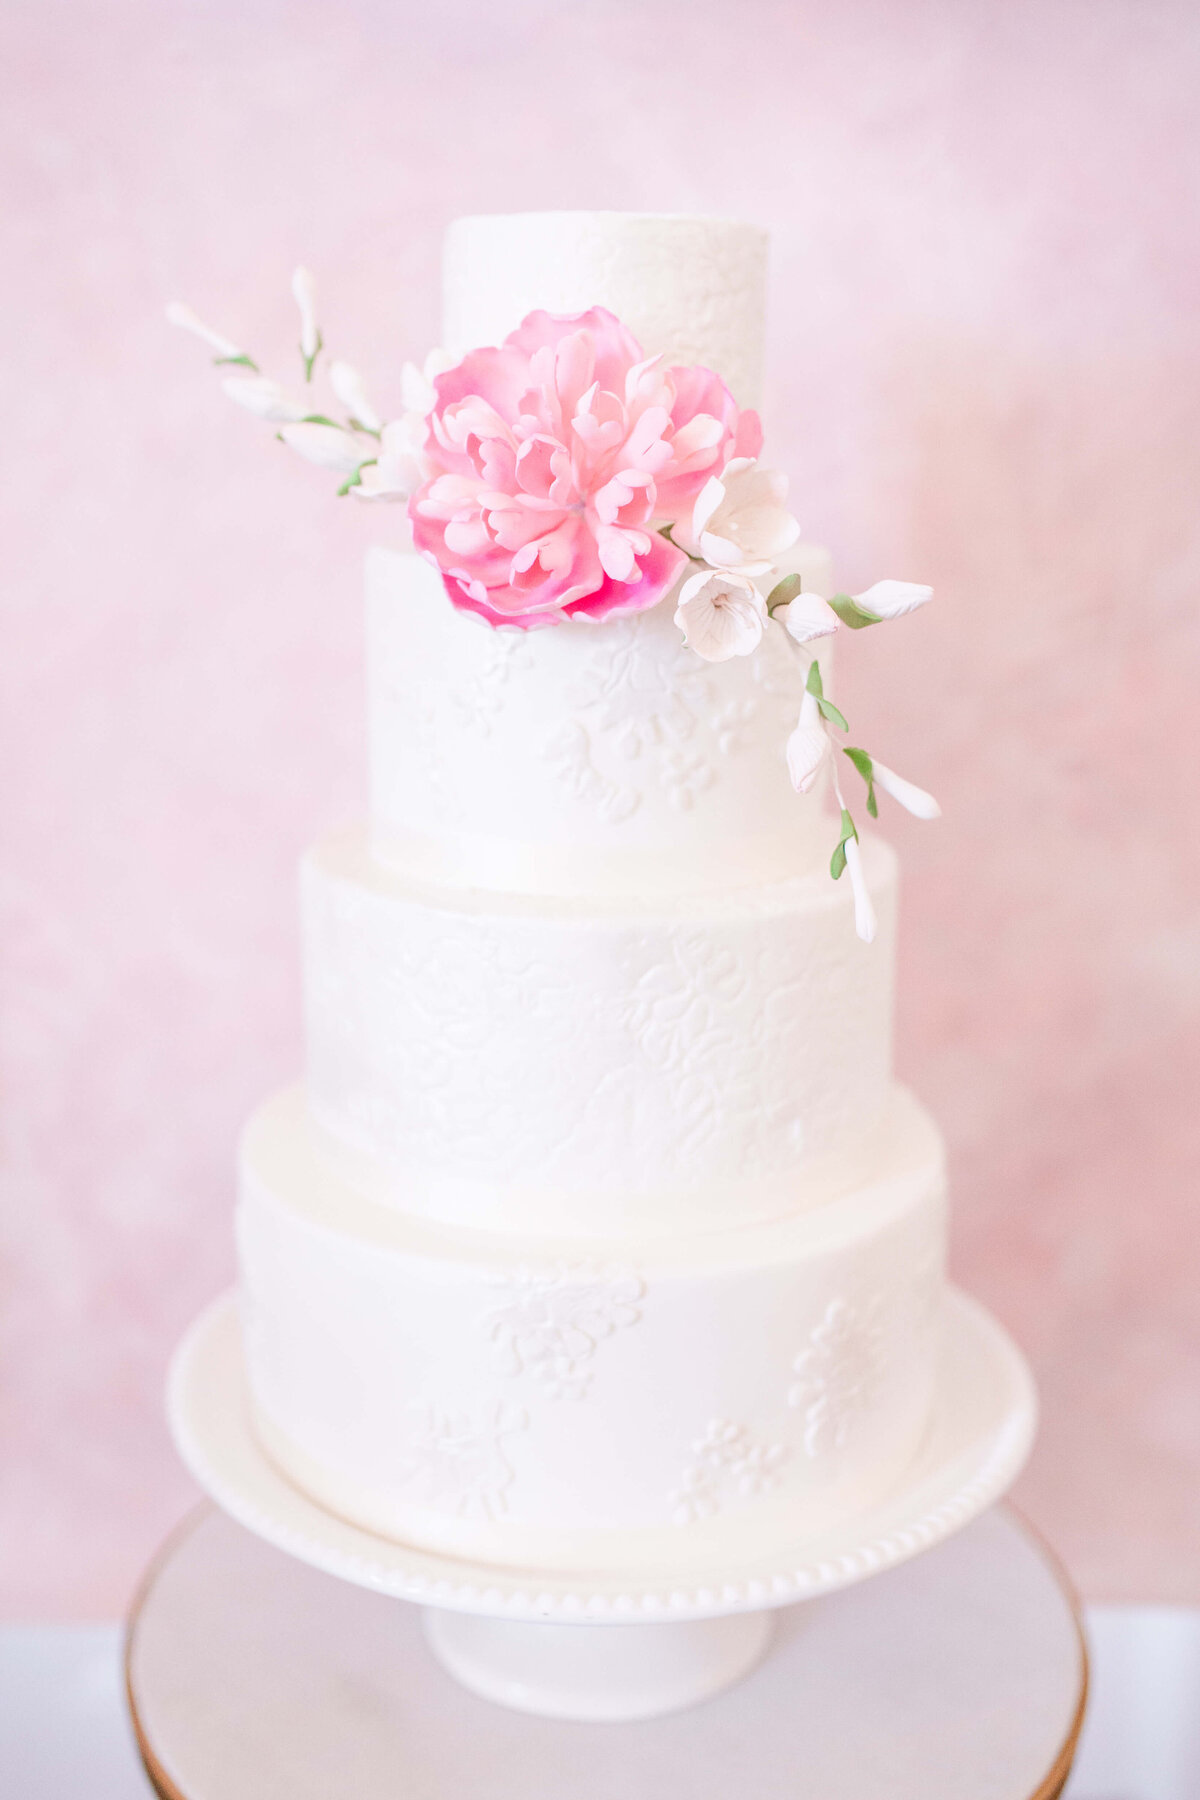 Cake-and-tablescape-details-at-midwest-wedding3